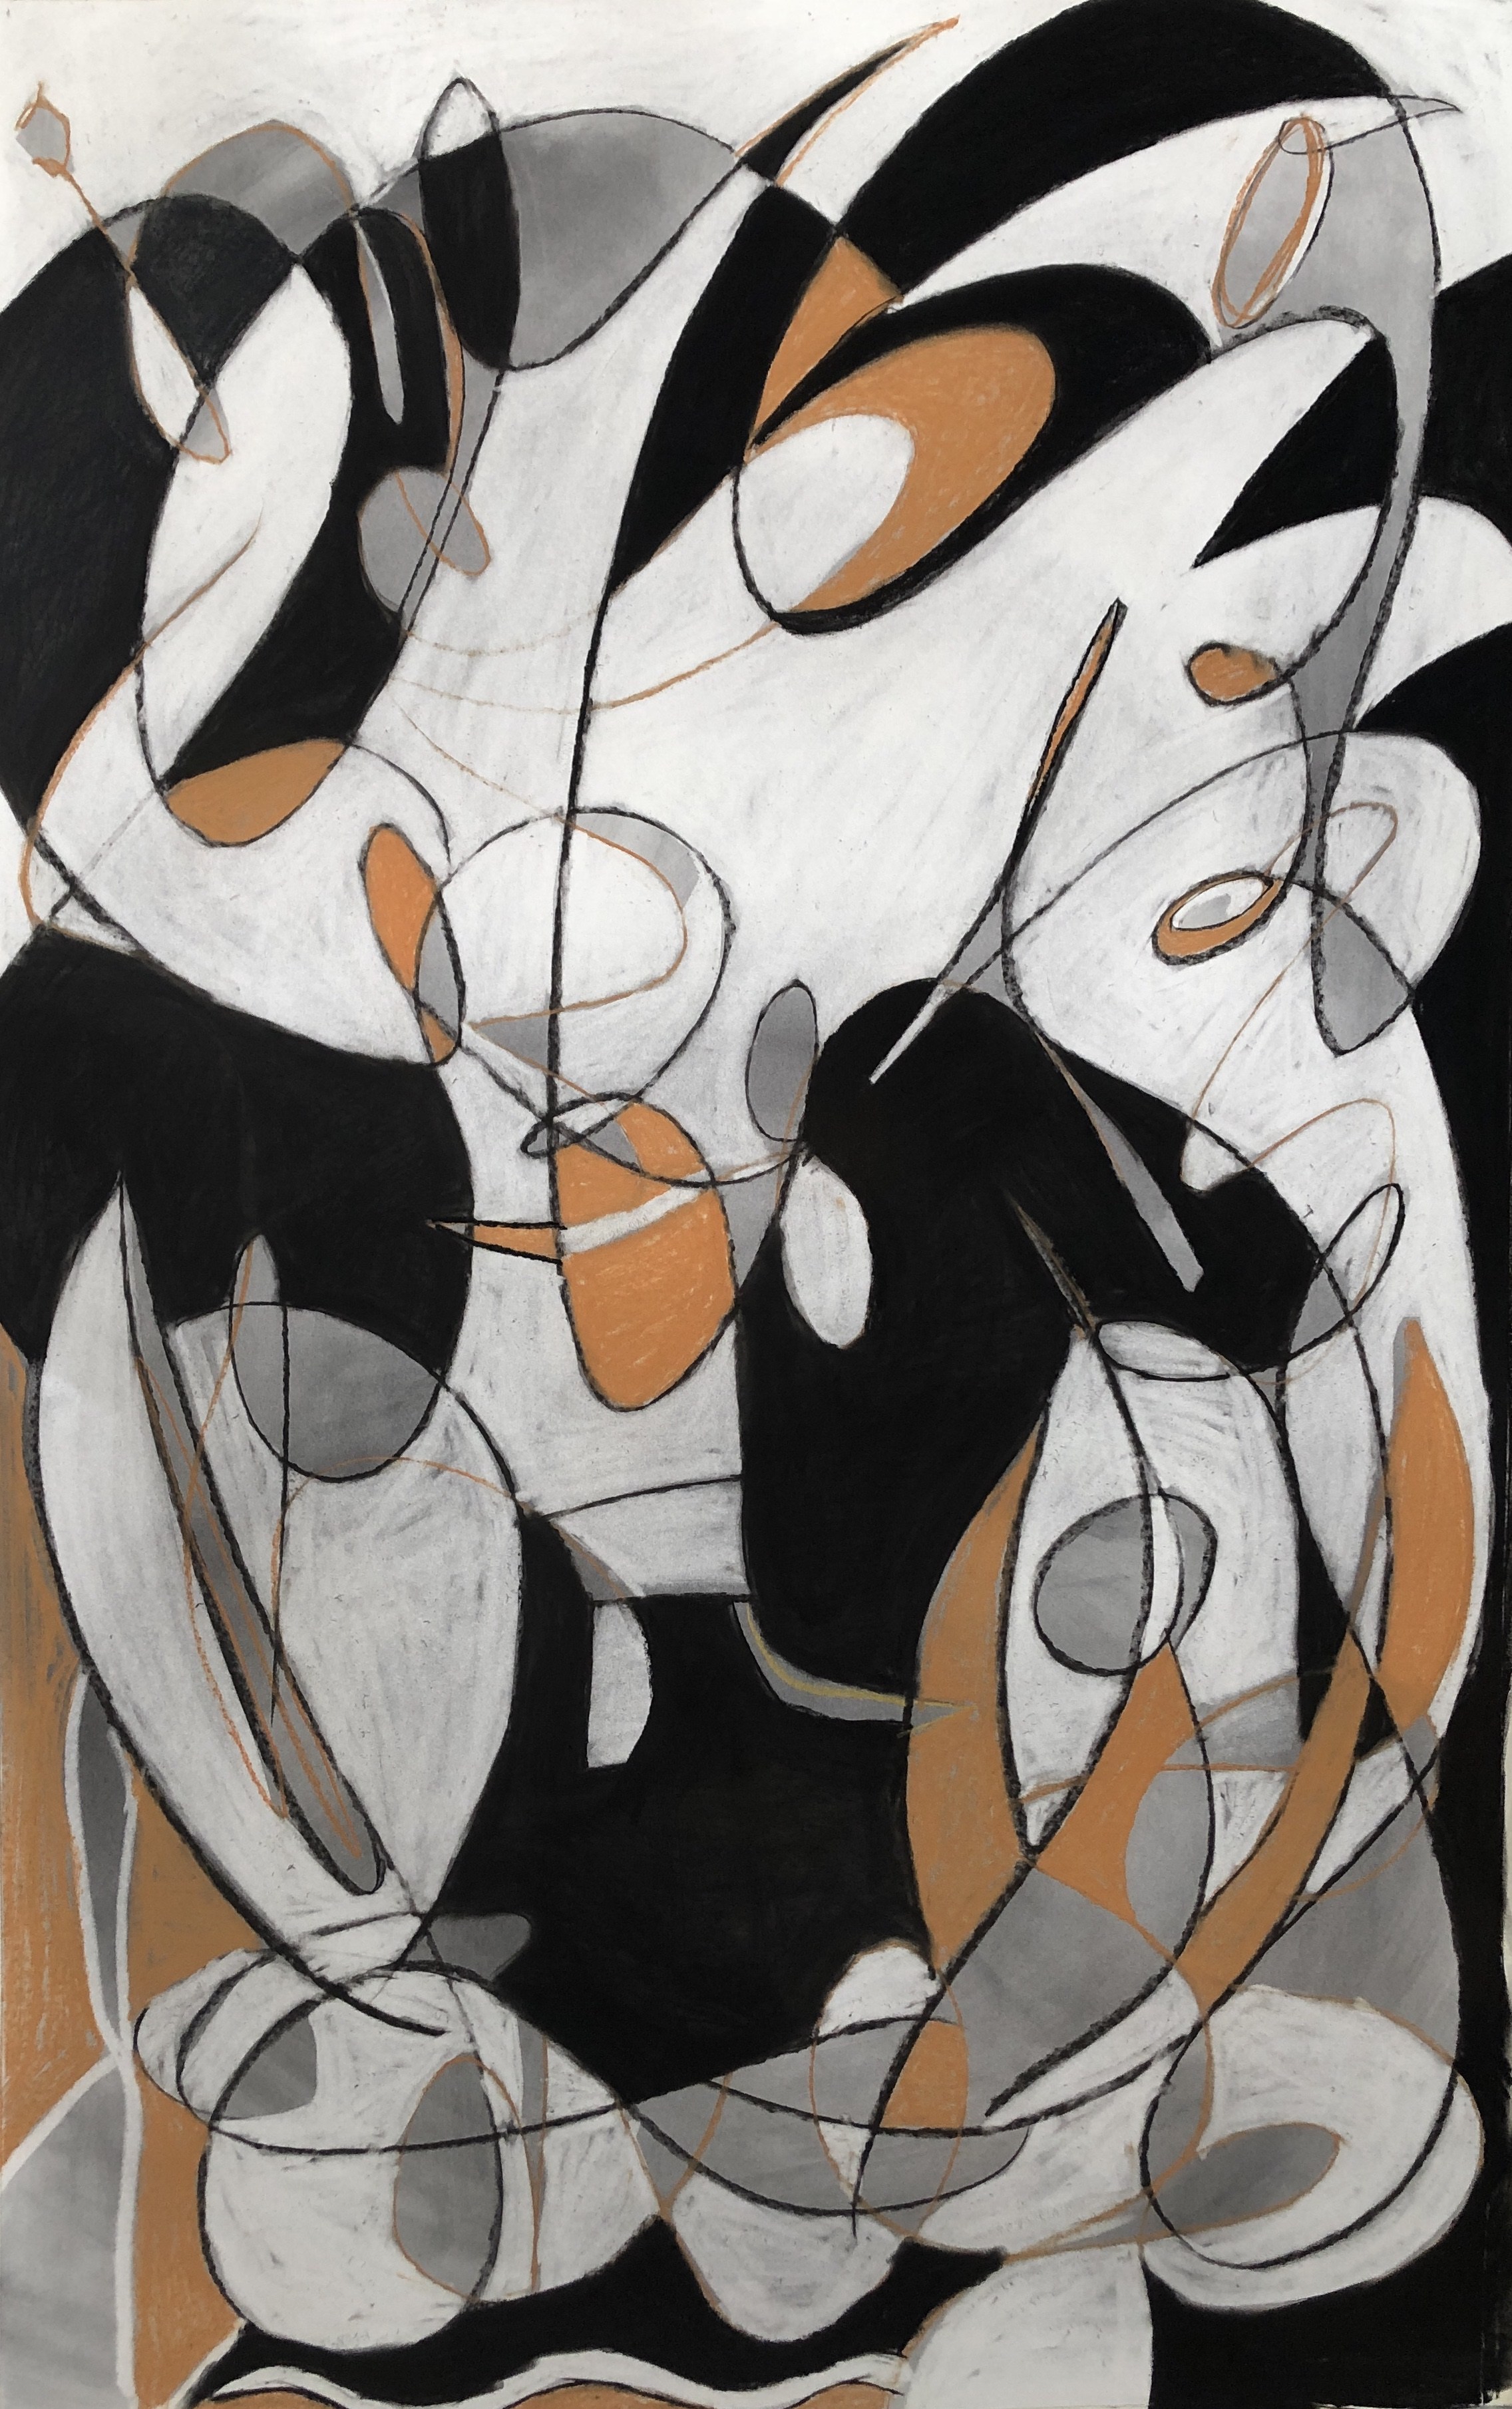 Fast Tempo, 54 x 35 inches, charcoal and conte crayon on paper, 2019